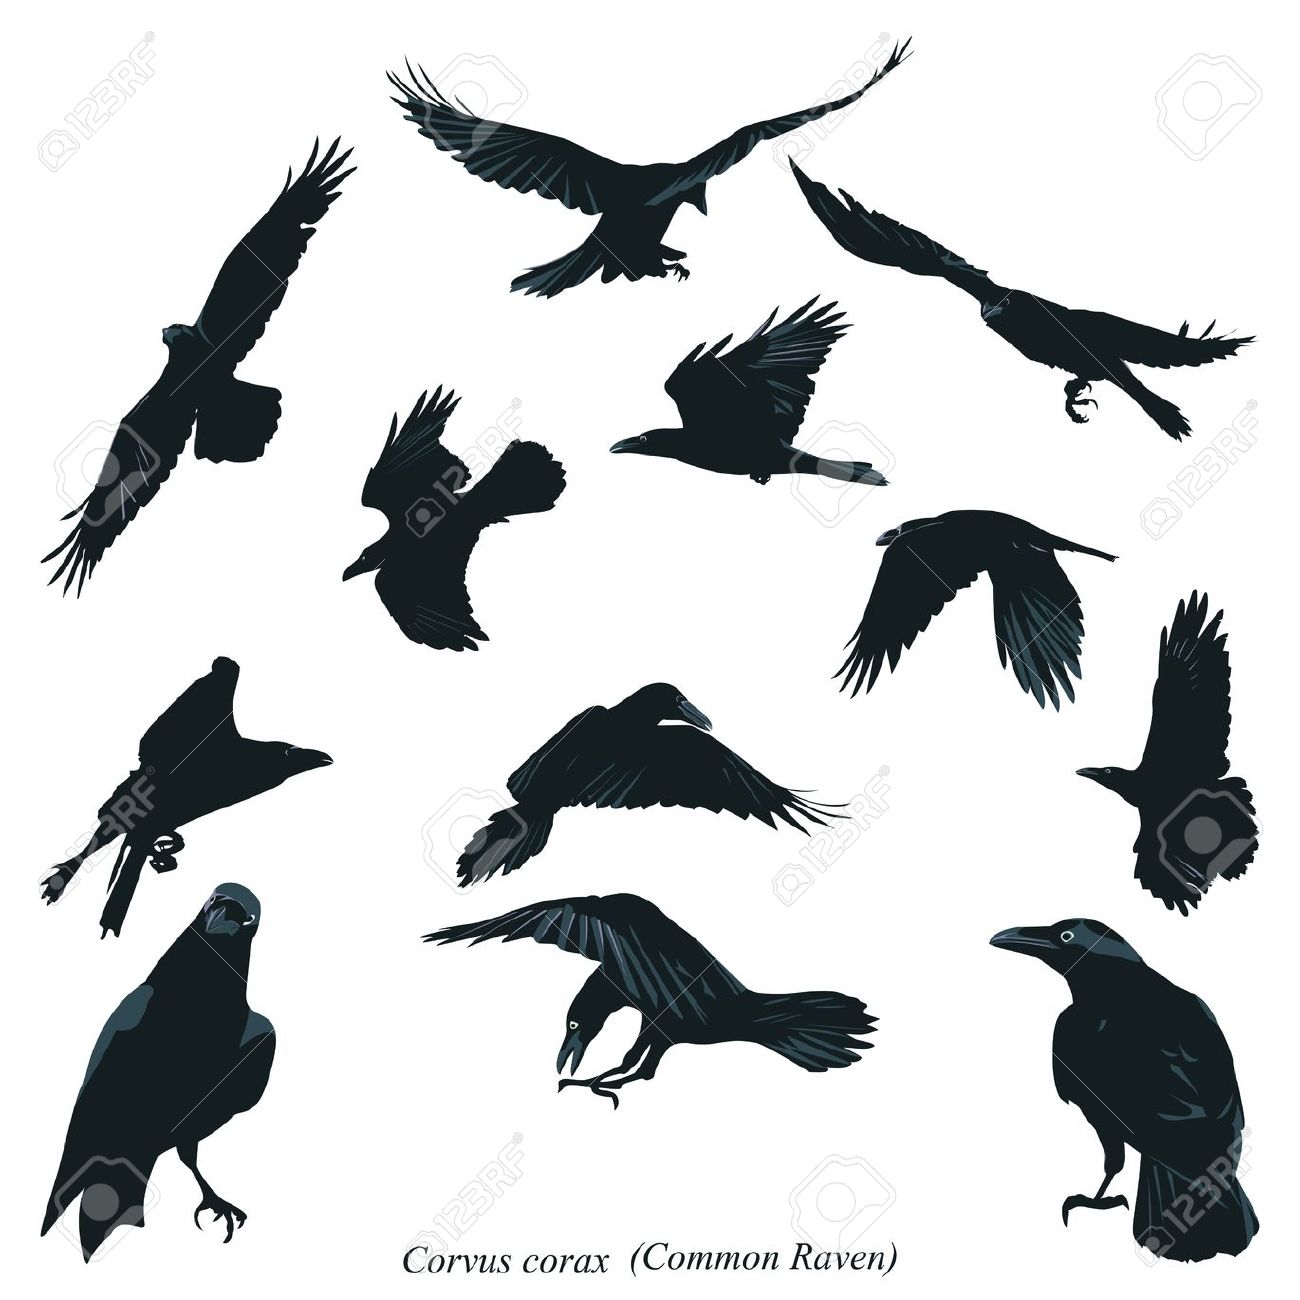 Common Raven clipart #17, Download drawings